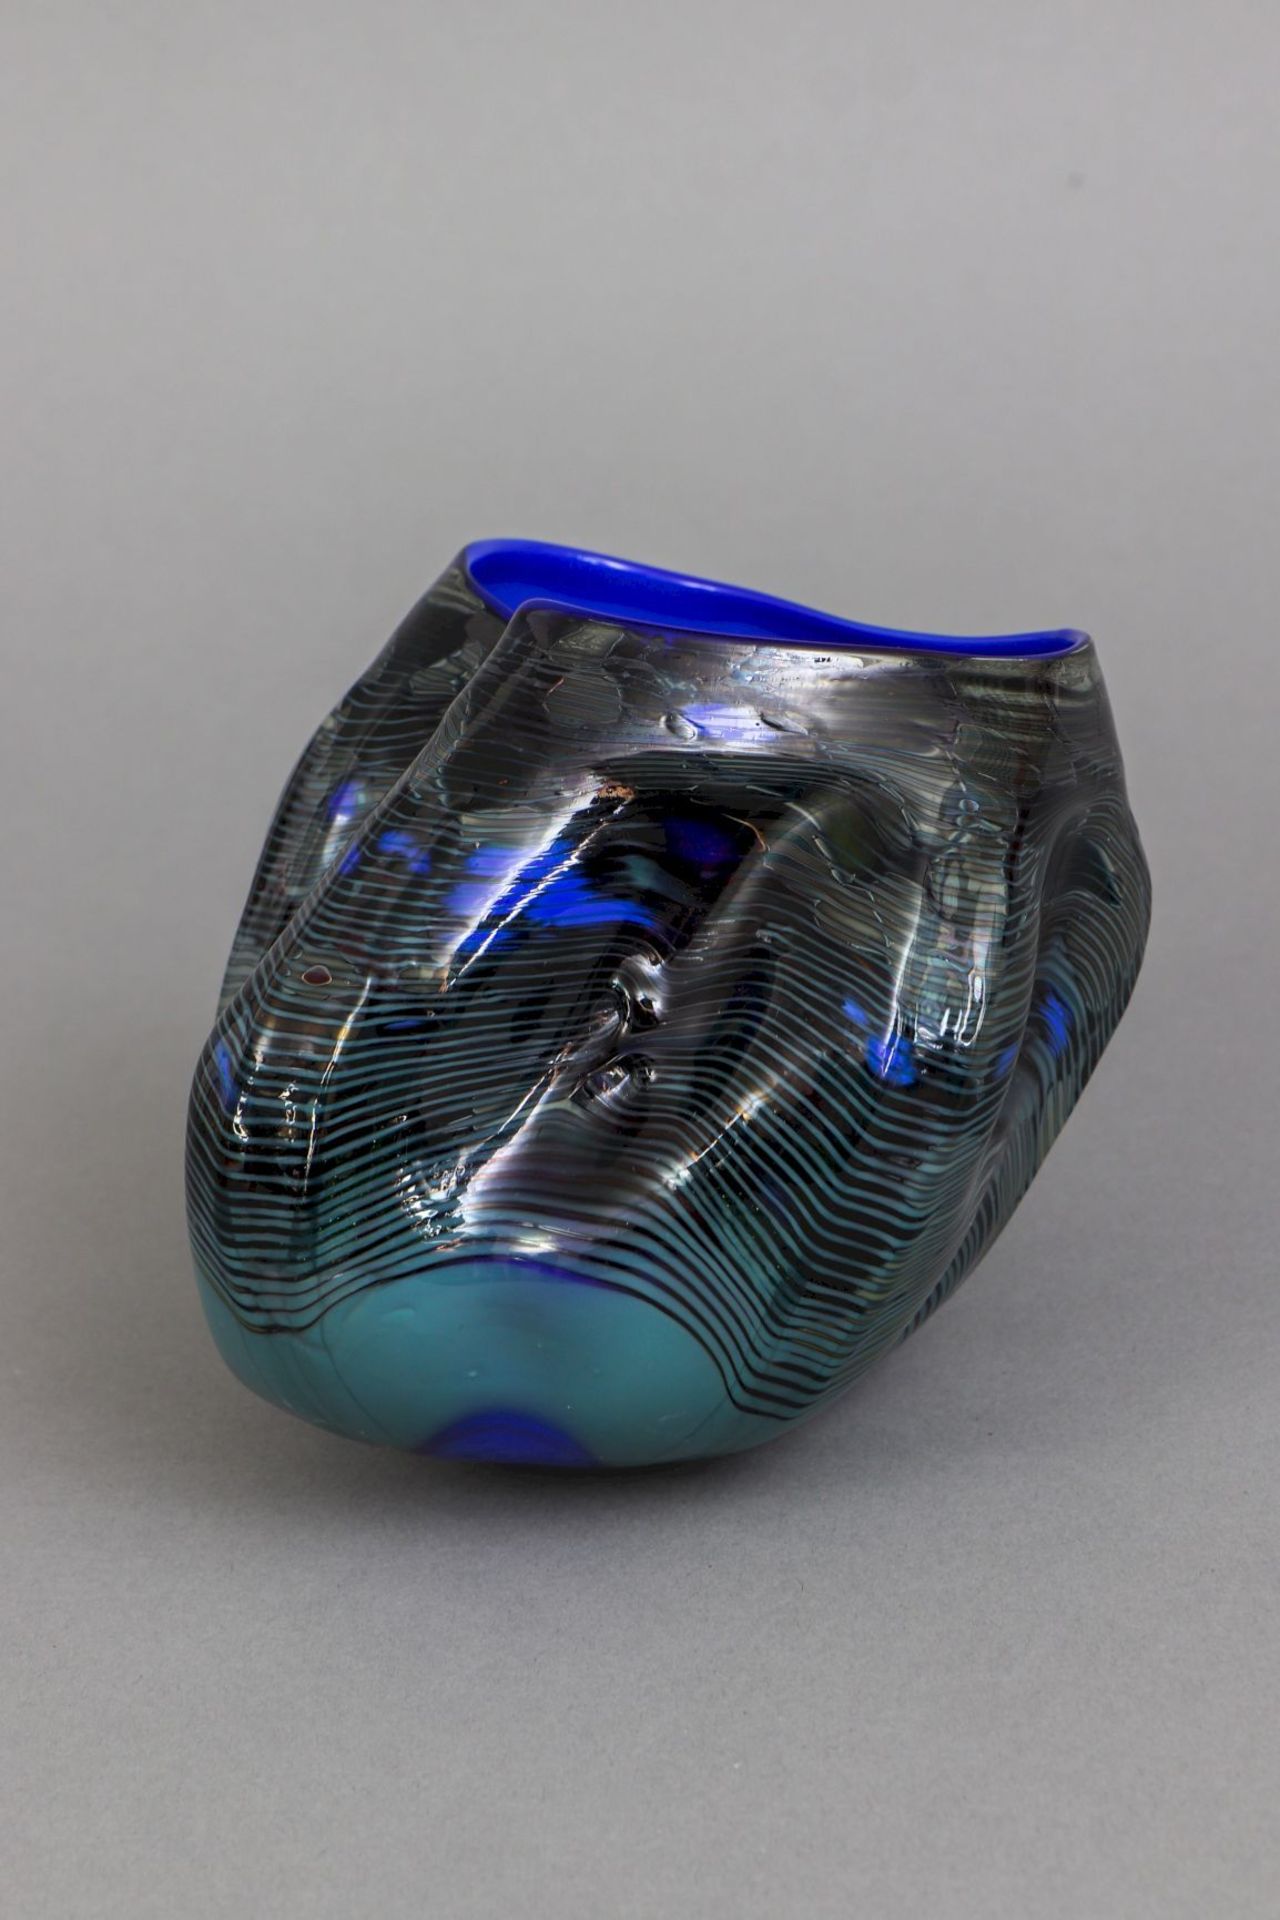 Dale Patrick CHIHULY (1941), Glasschale ¨Blue Macchia¨ - Image 3 of 5